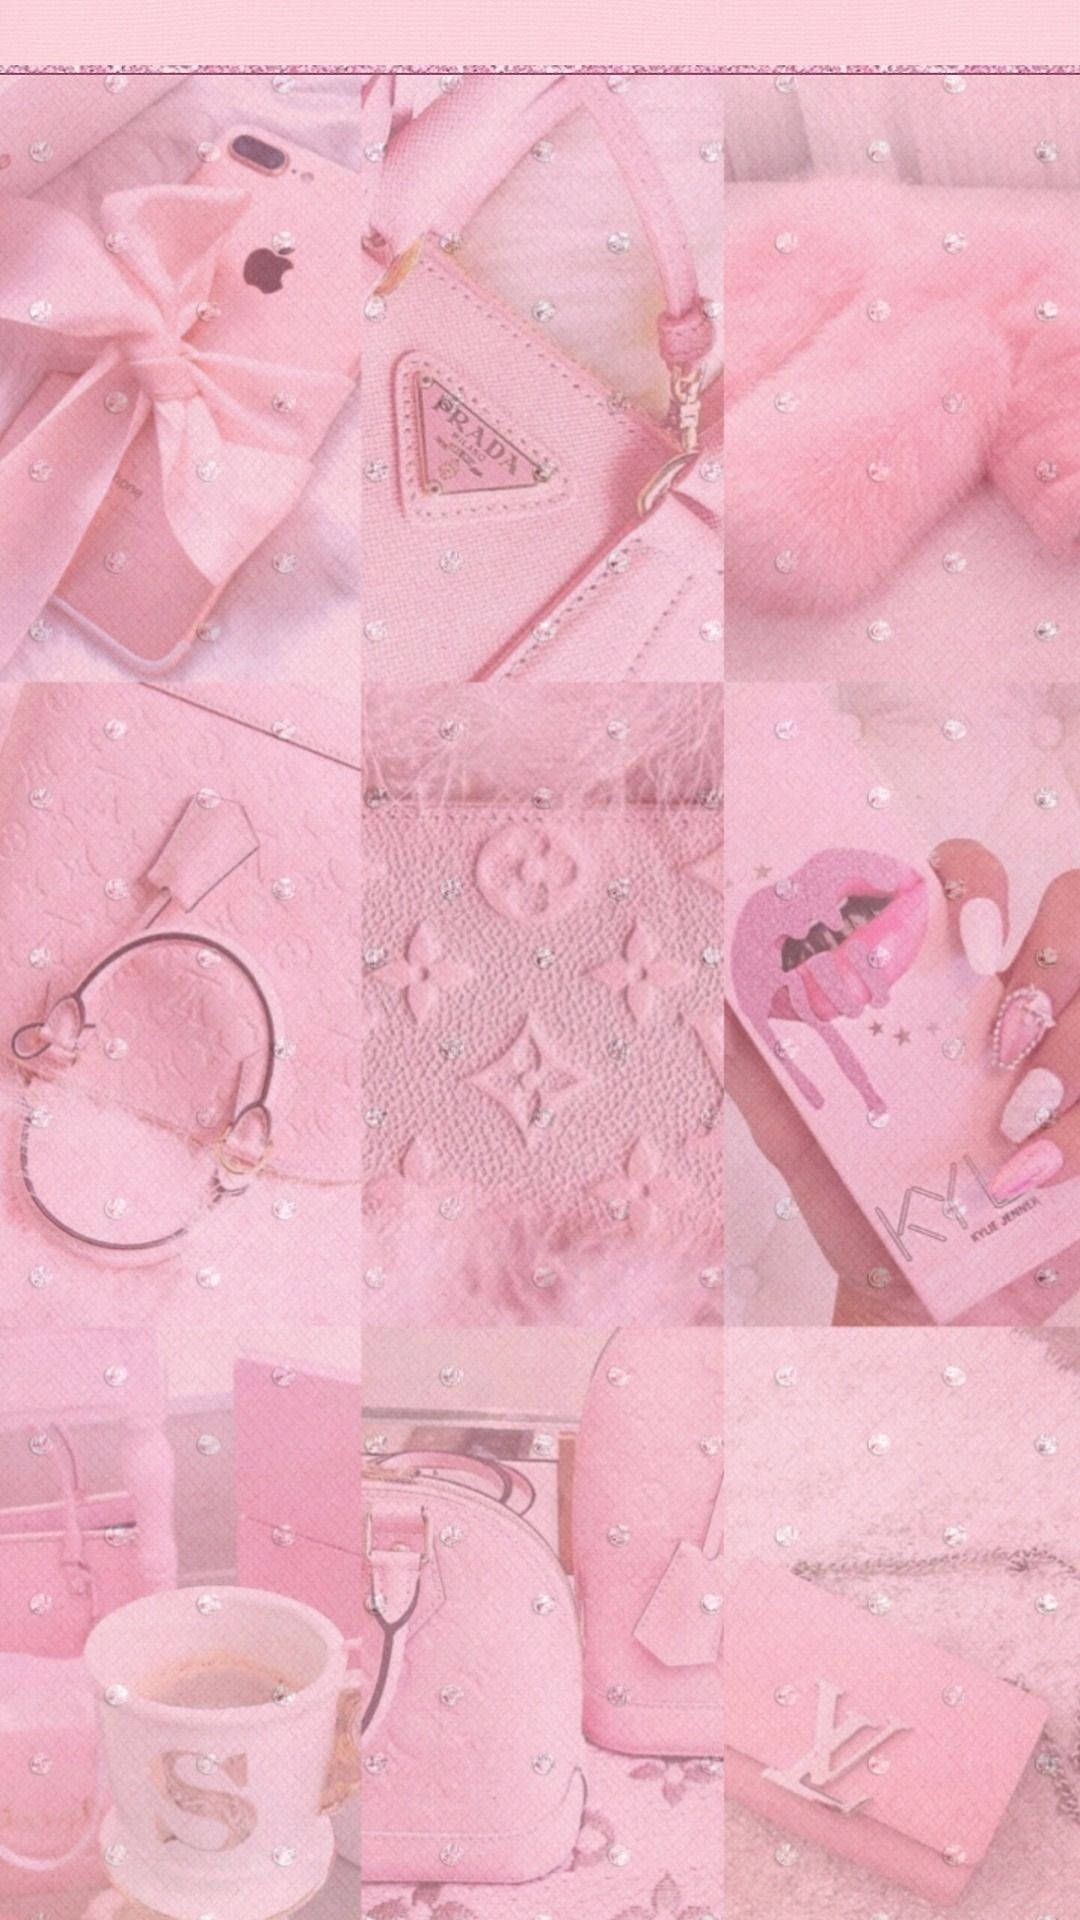 Pretty Pink Aesthetic Lock Screen Background